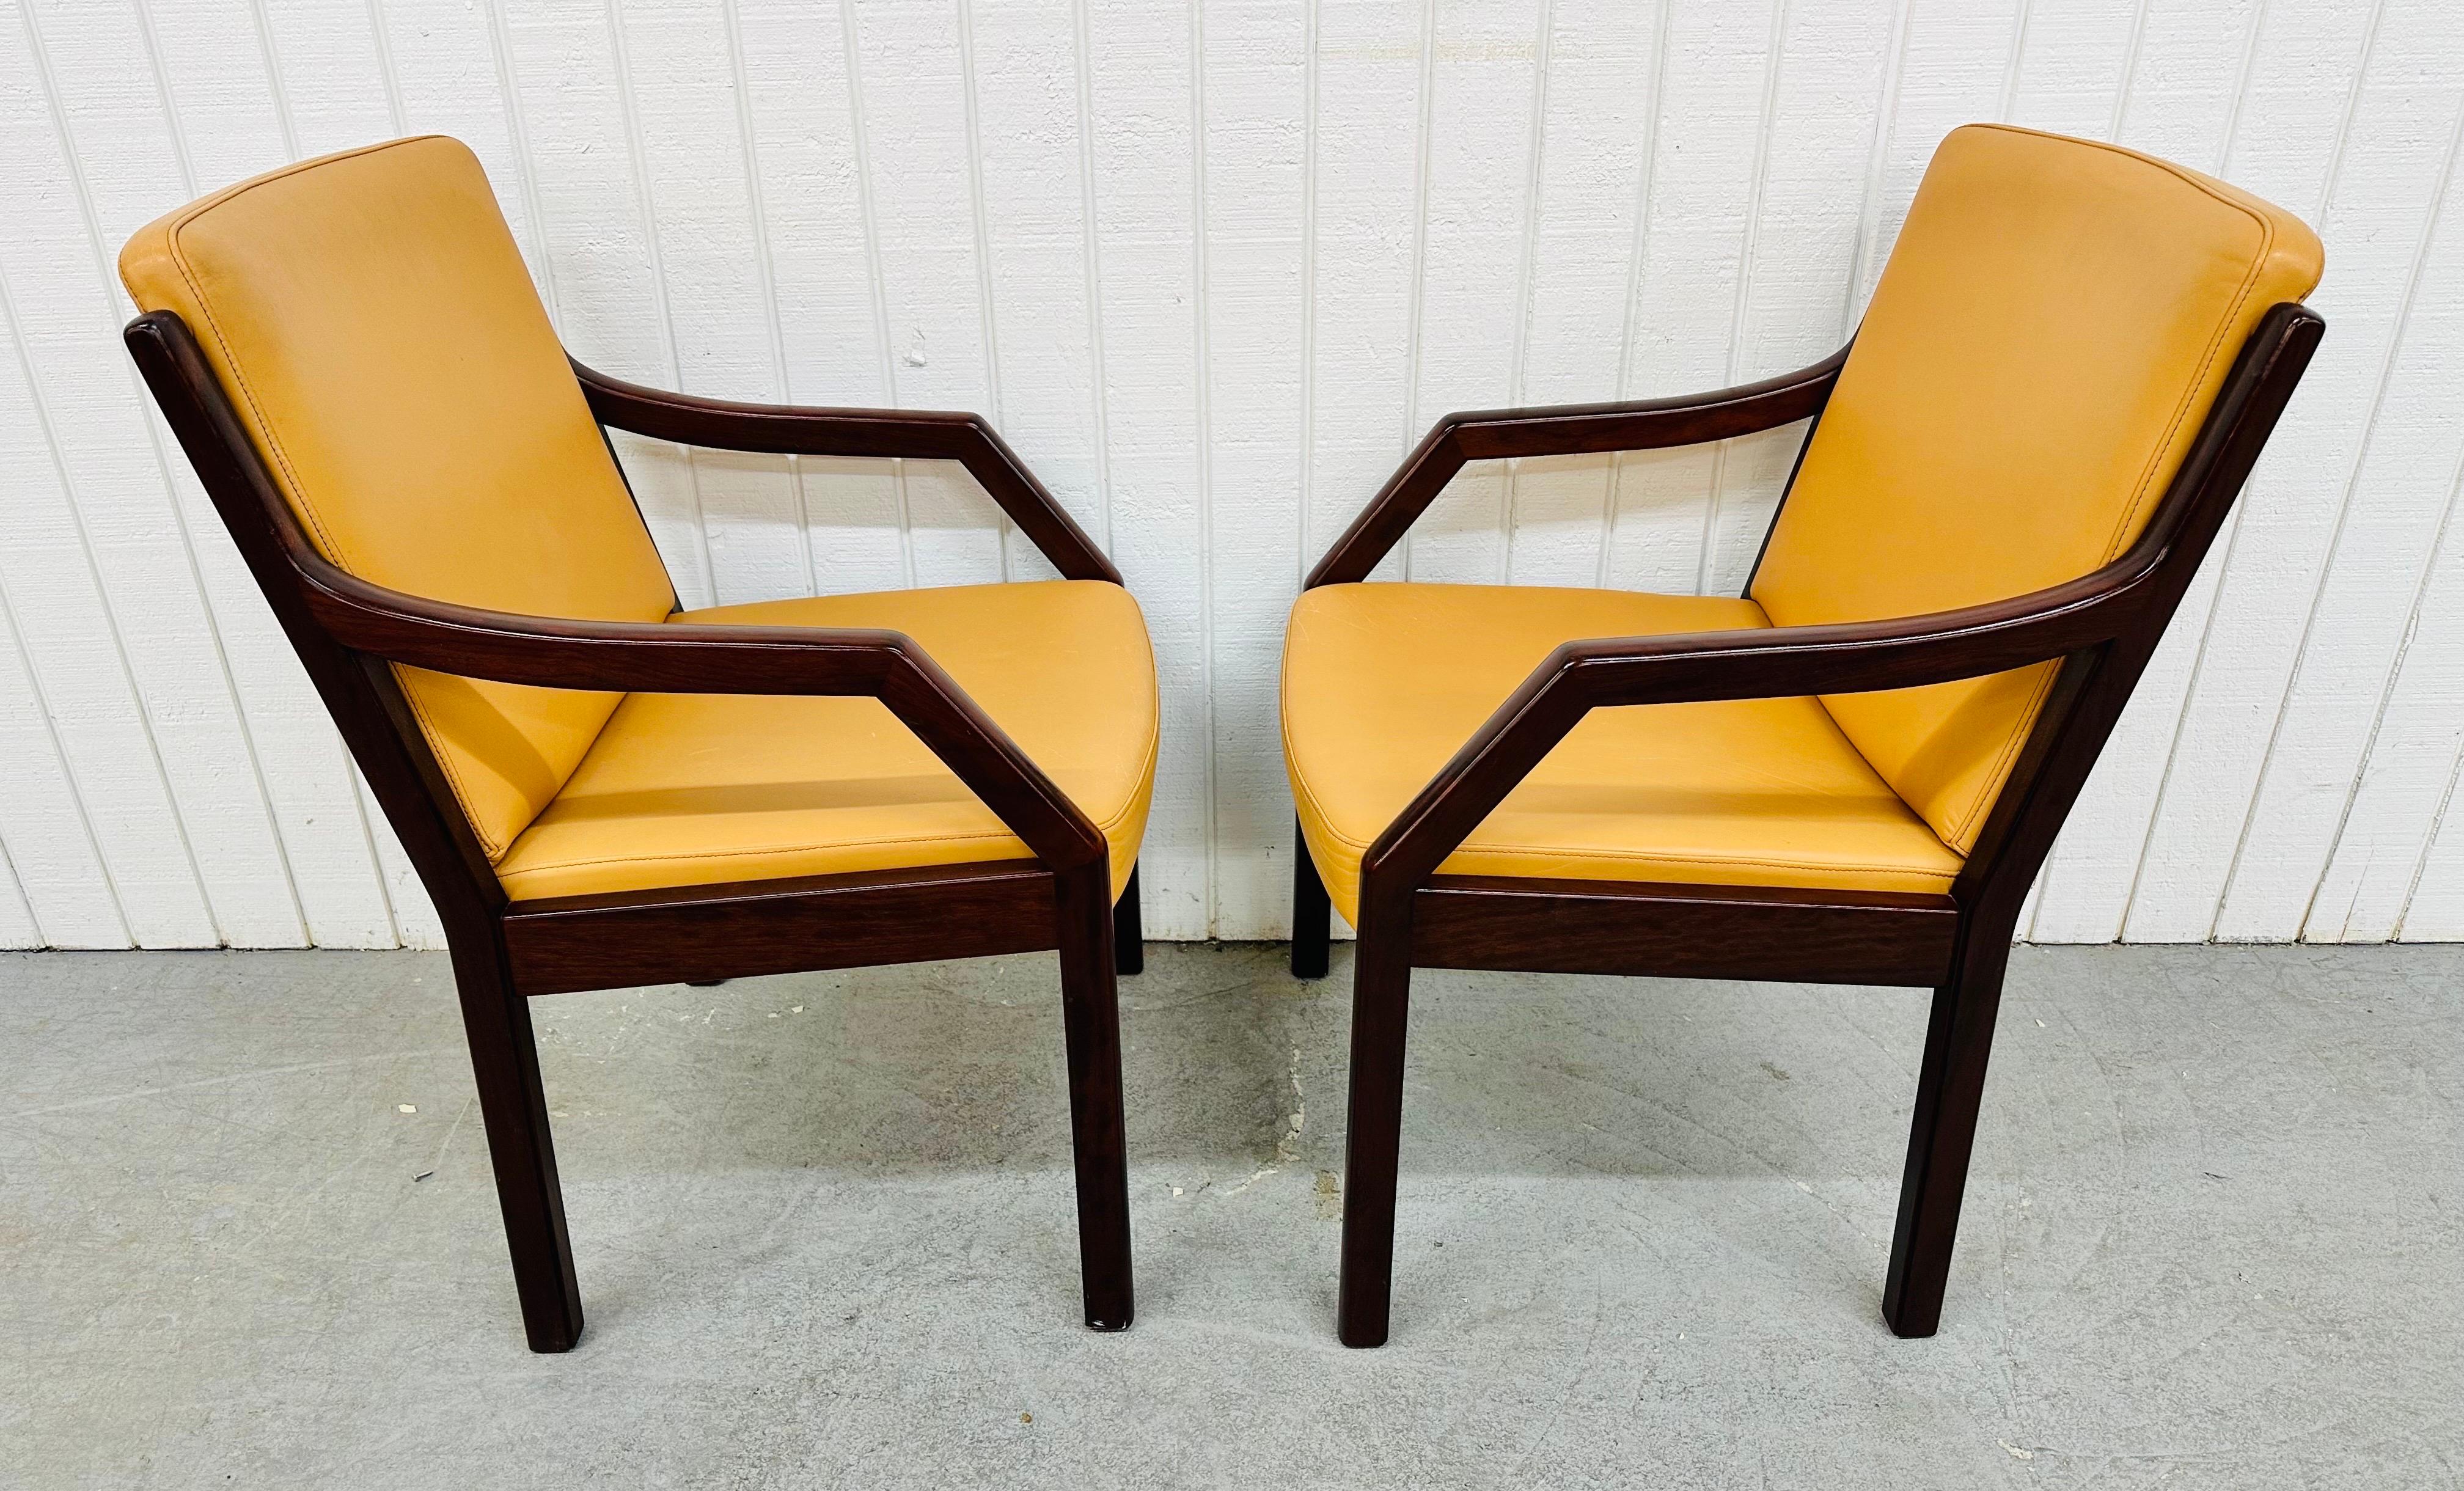 20th Century Vintage Dunbar Style Lounge Chairs - Set of 2 For Sale